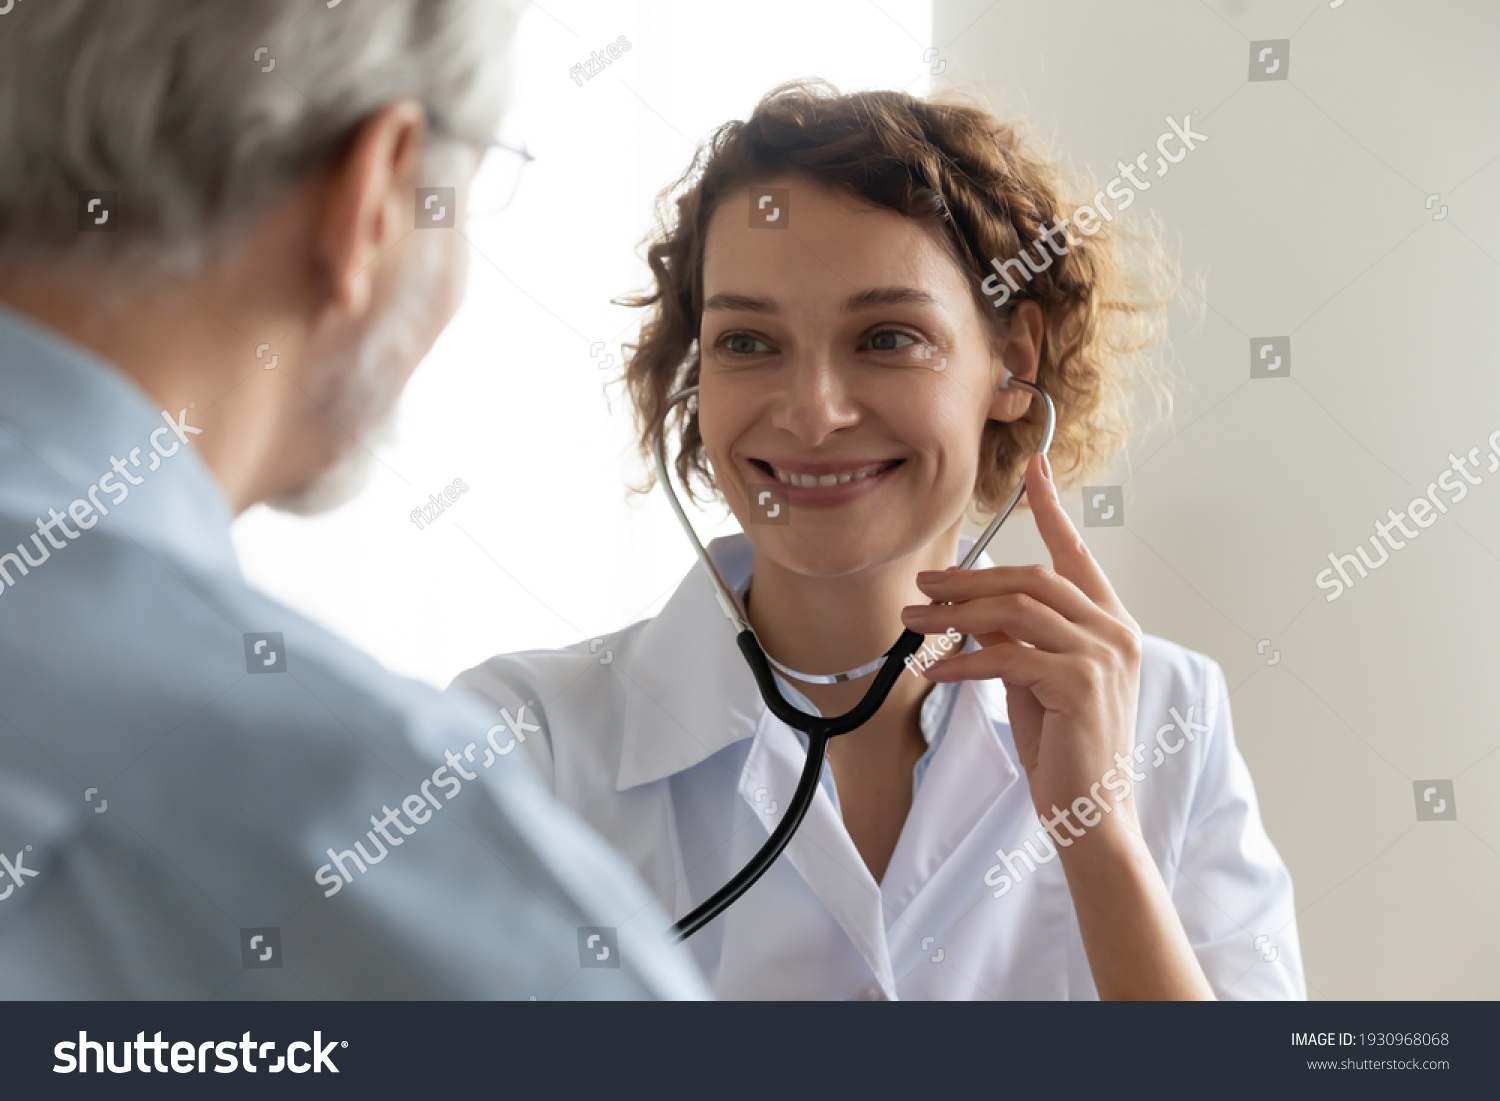 Close up of smiling young Caucasian female doctor use stethoscope examine mature patient heart rate in clinic. Happy caring woman nurse hold phonendoscope listen to elderly man heartbeat in hospital. #1930968068